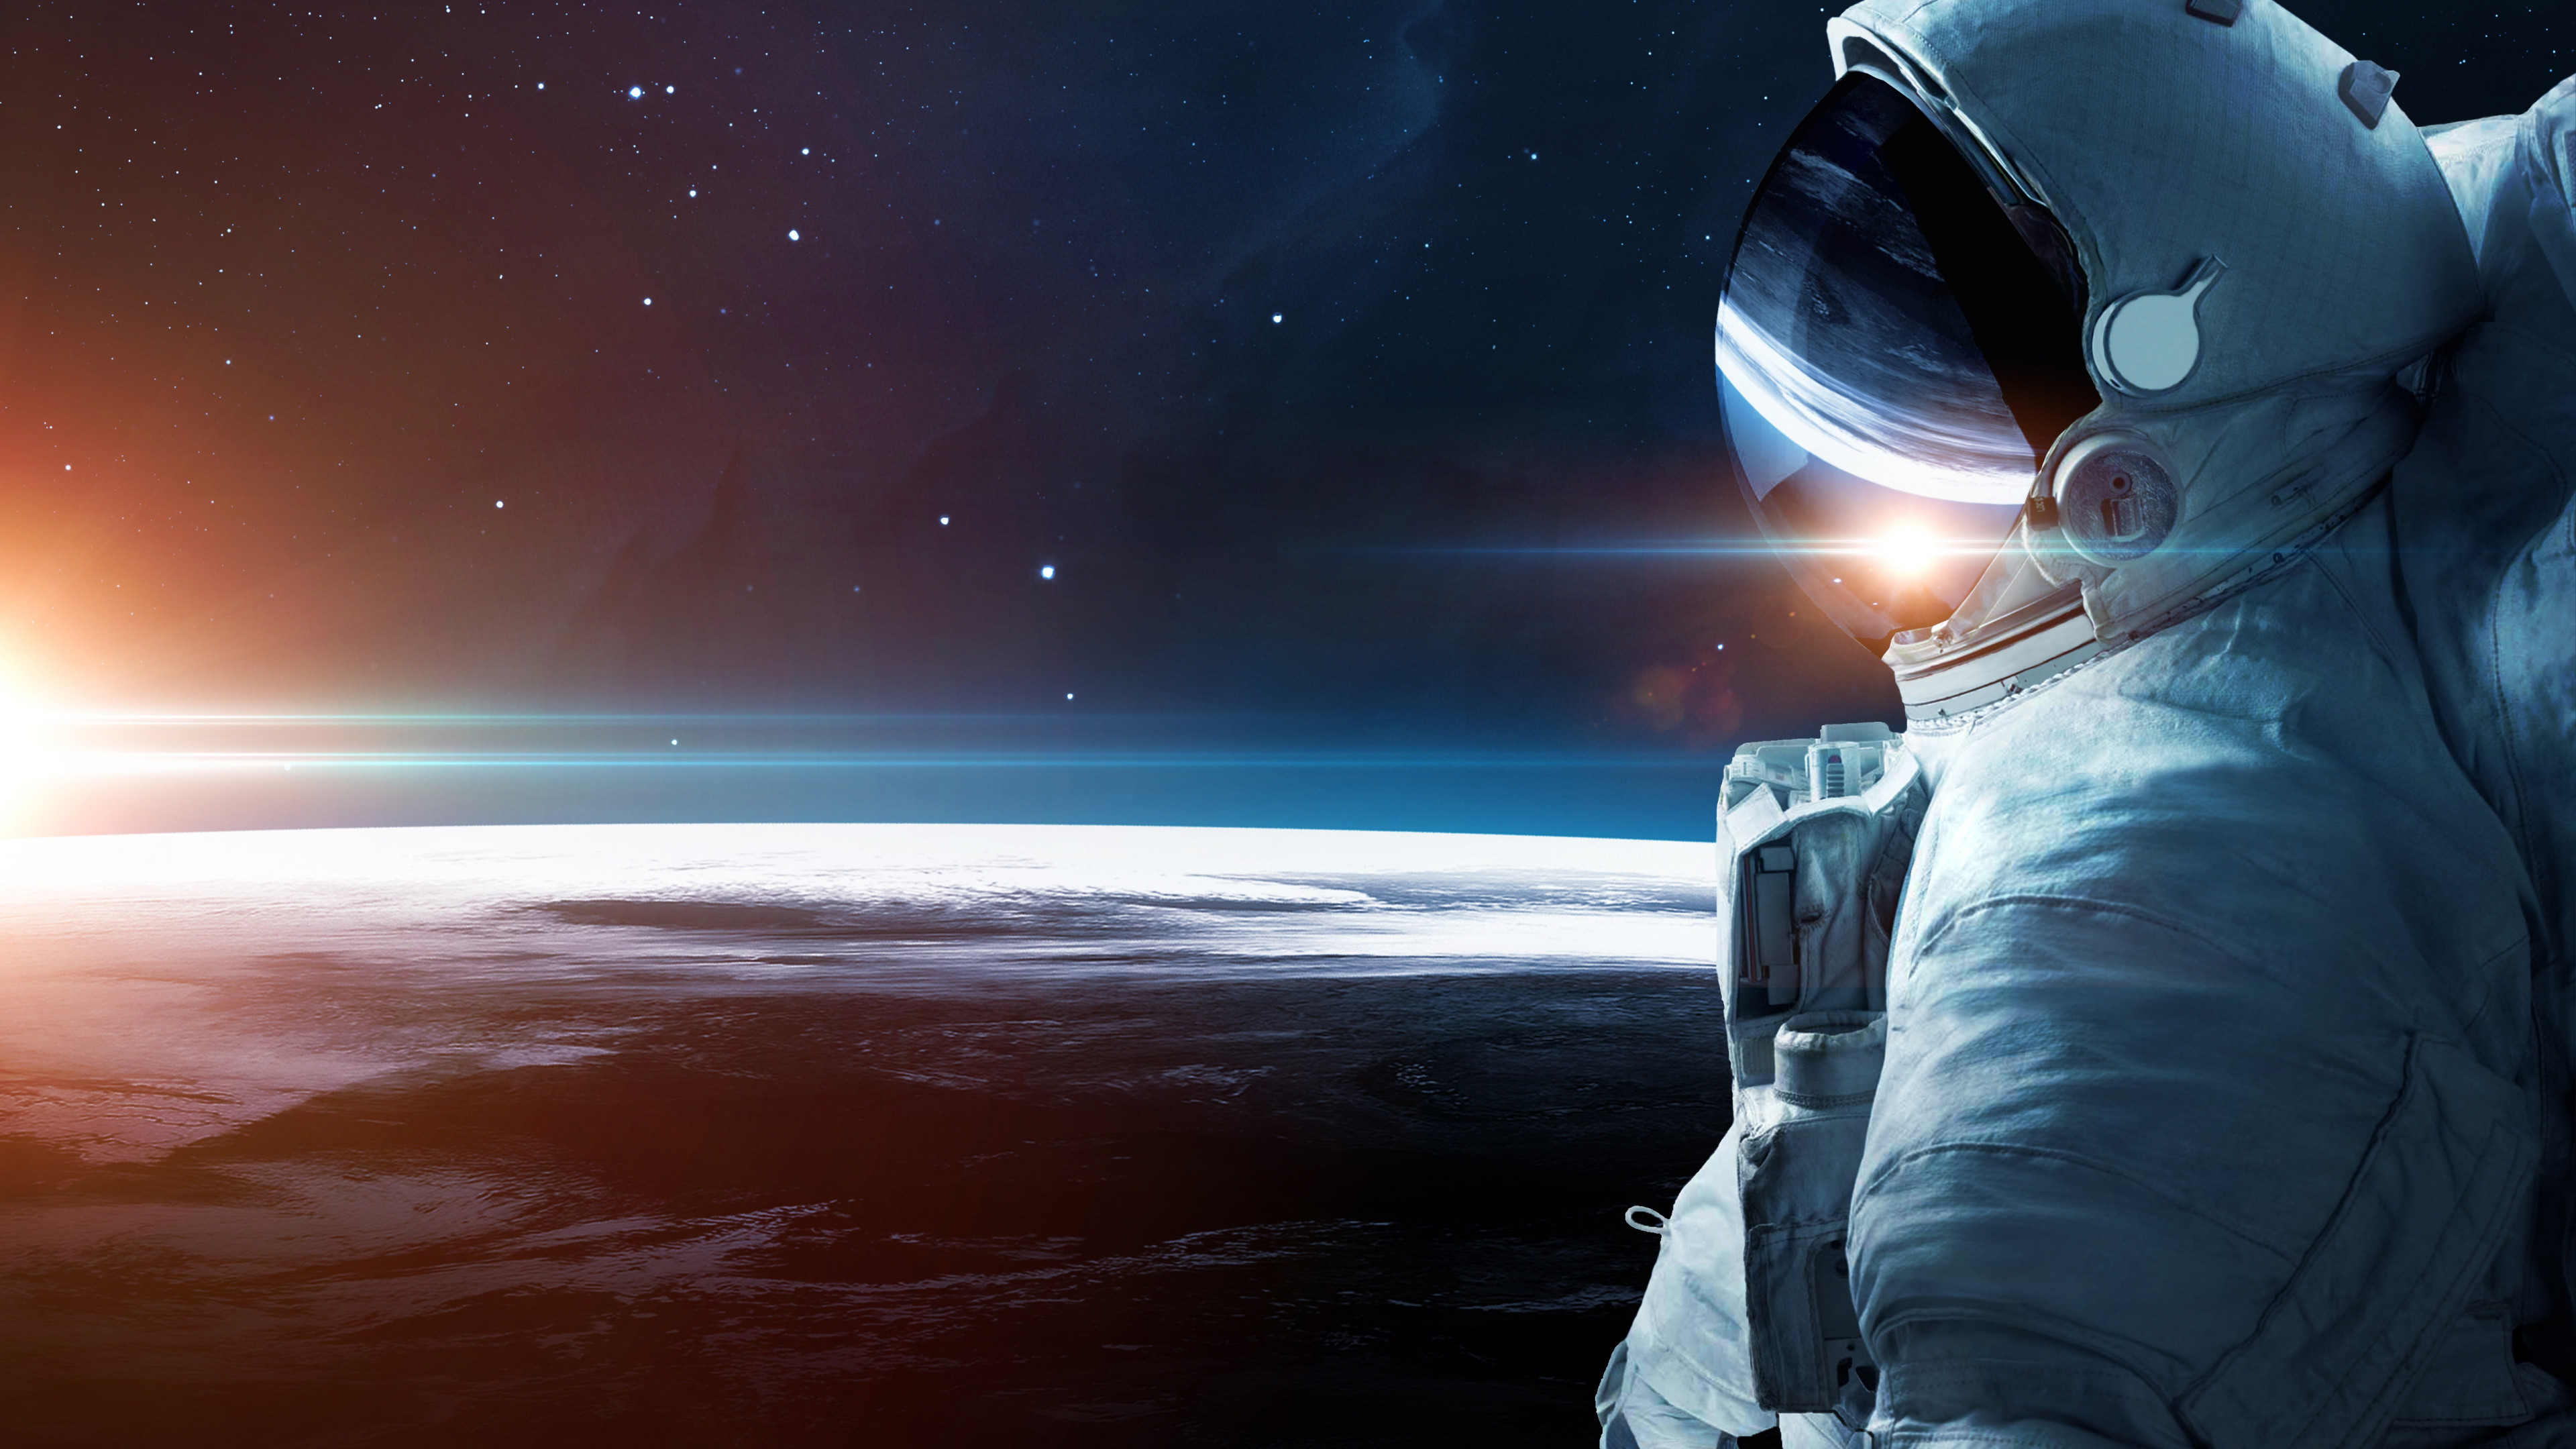 Astronaut in space Galaxy and Nebula space art Vertical 169 wallpaper  with spaceman Elements of this image furnished by NASA Stock Photo  Adobe  Stock